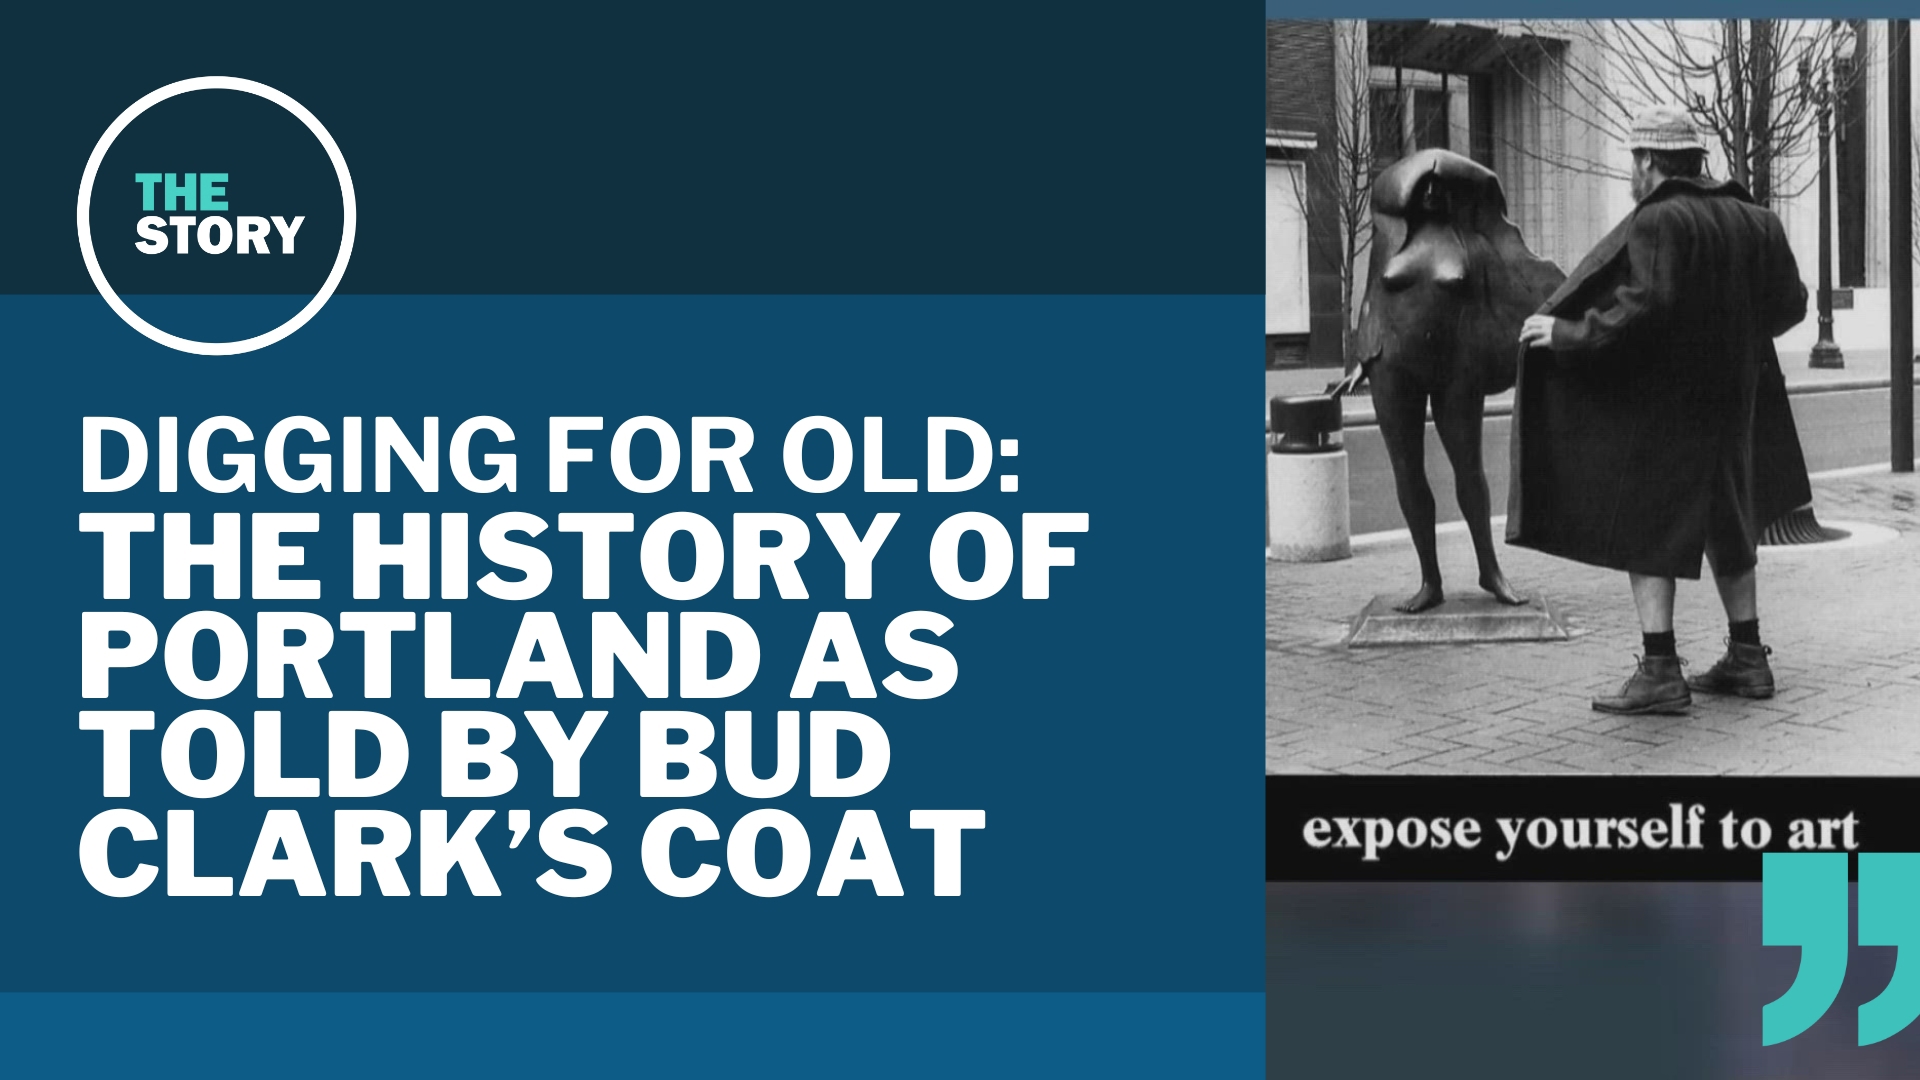 Bud Clark perhaps best personifies Portland's "weird" pedigree. Now his famous coat will play a key role in remembering that legacy.